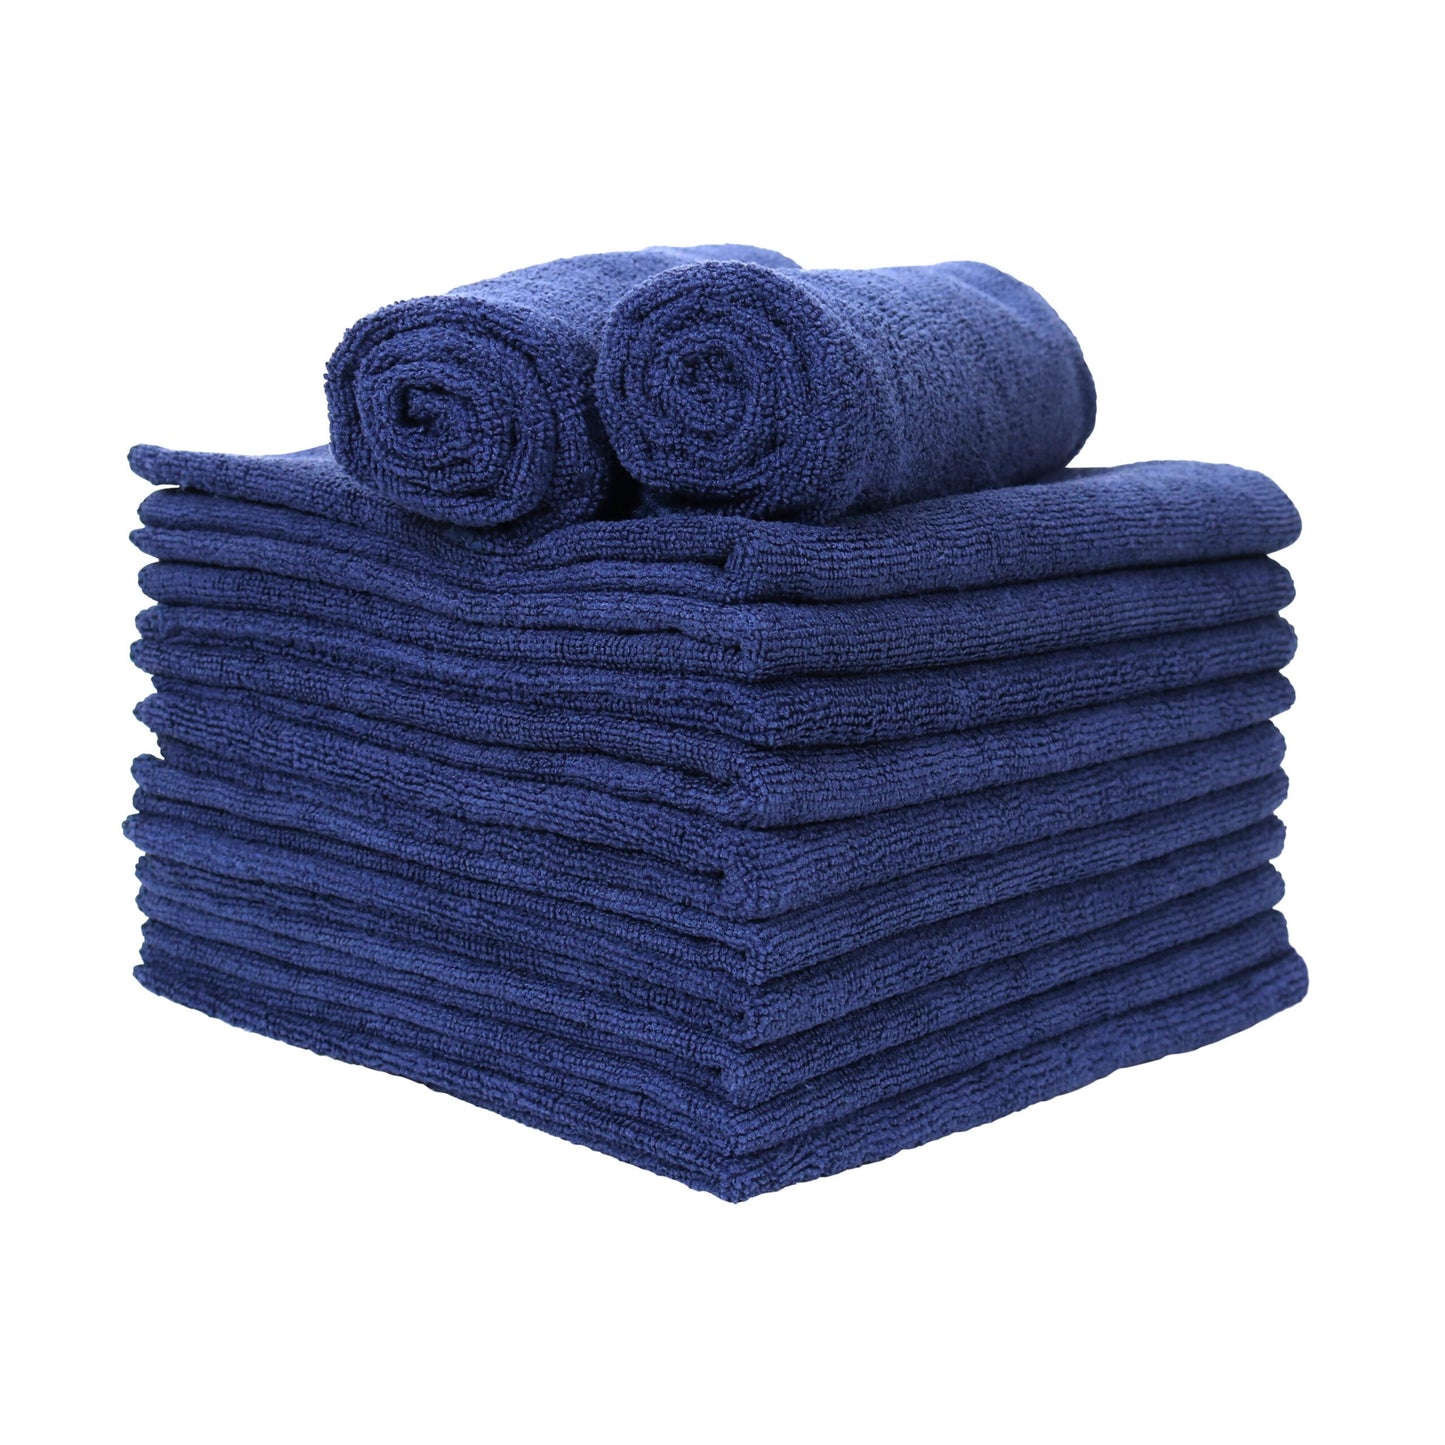 a stack of navy blue microfiber towels